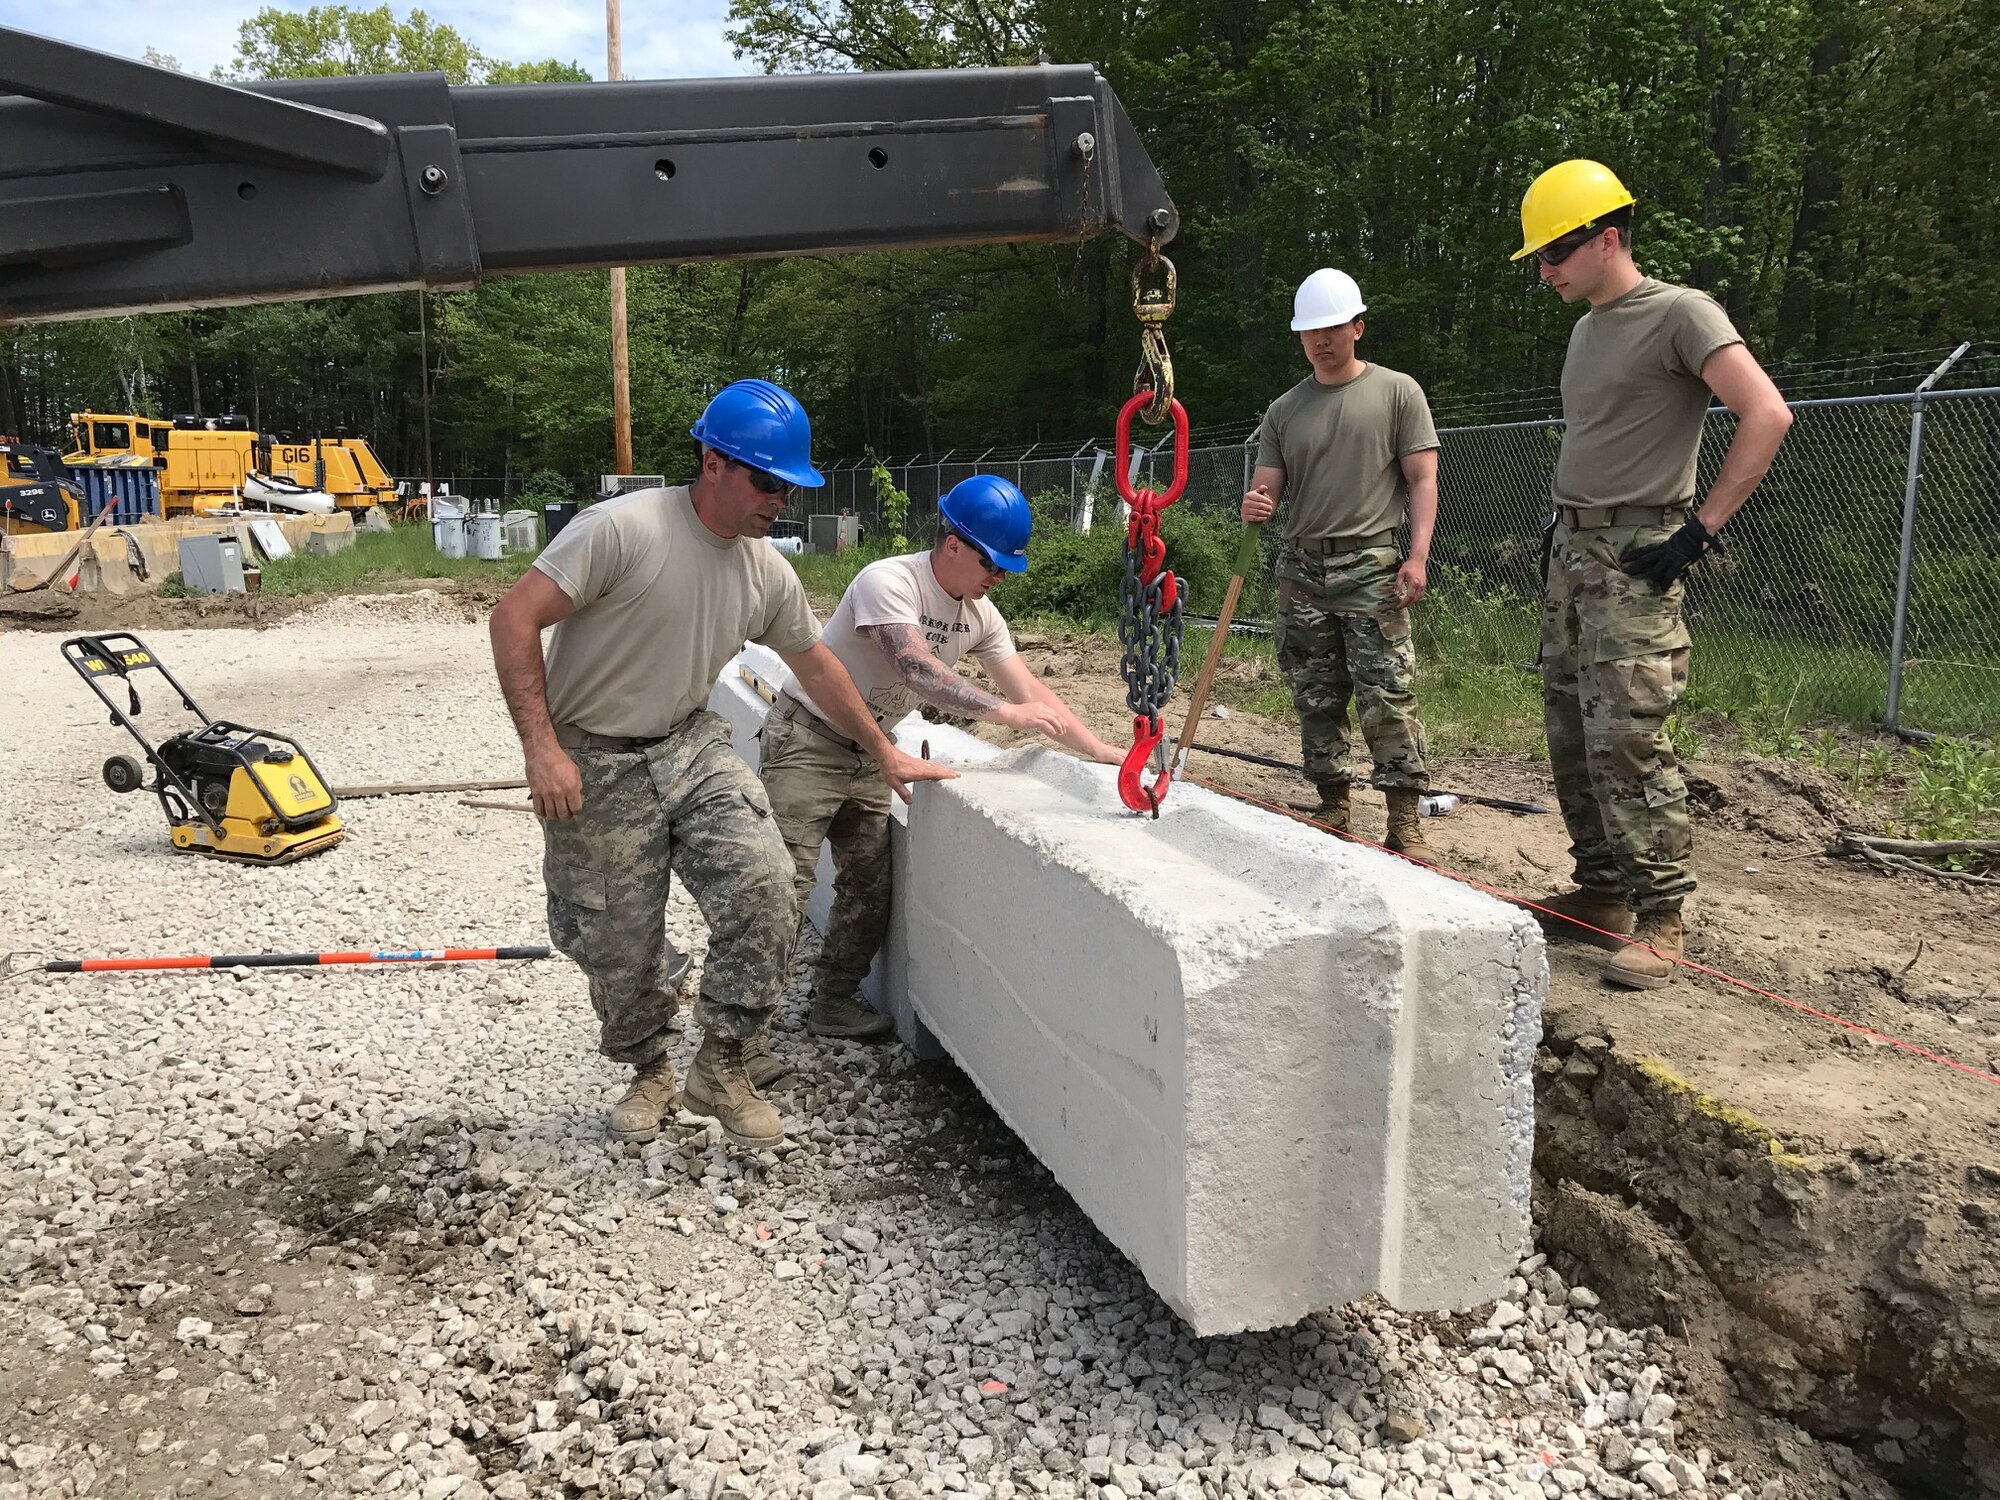 Airmen of the 157th Civil Engineer Squadron and Soldiers of Detachment 2, 160th Engineer Company place a block May 21, 2017, at  Pease Air National Guard Base, N.H. The joint team of New Hampshire National Guard members collaborated on four construction projects during a two-week training period. (U.S. Air National Guard Photo By Master Sgt. Thomas Johnson)